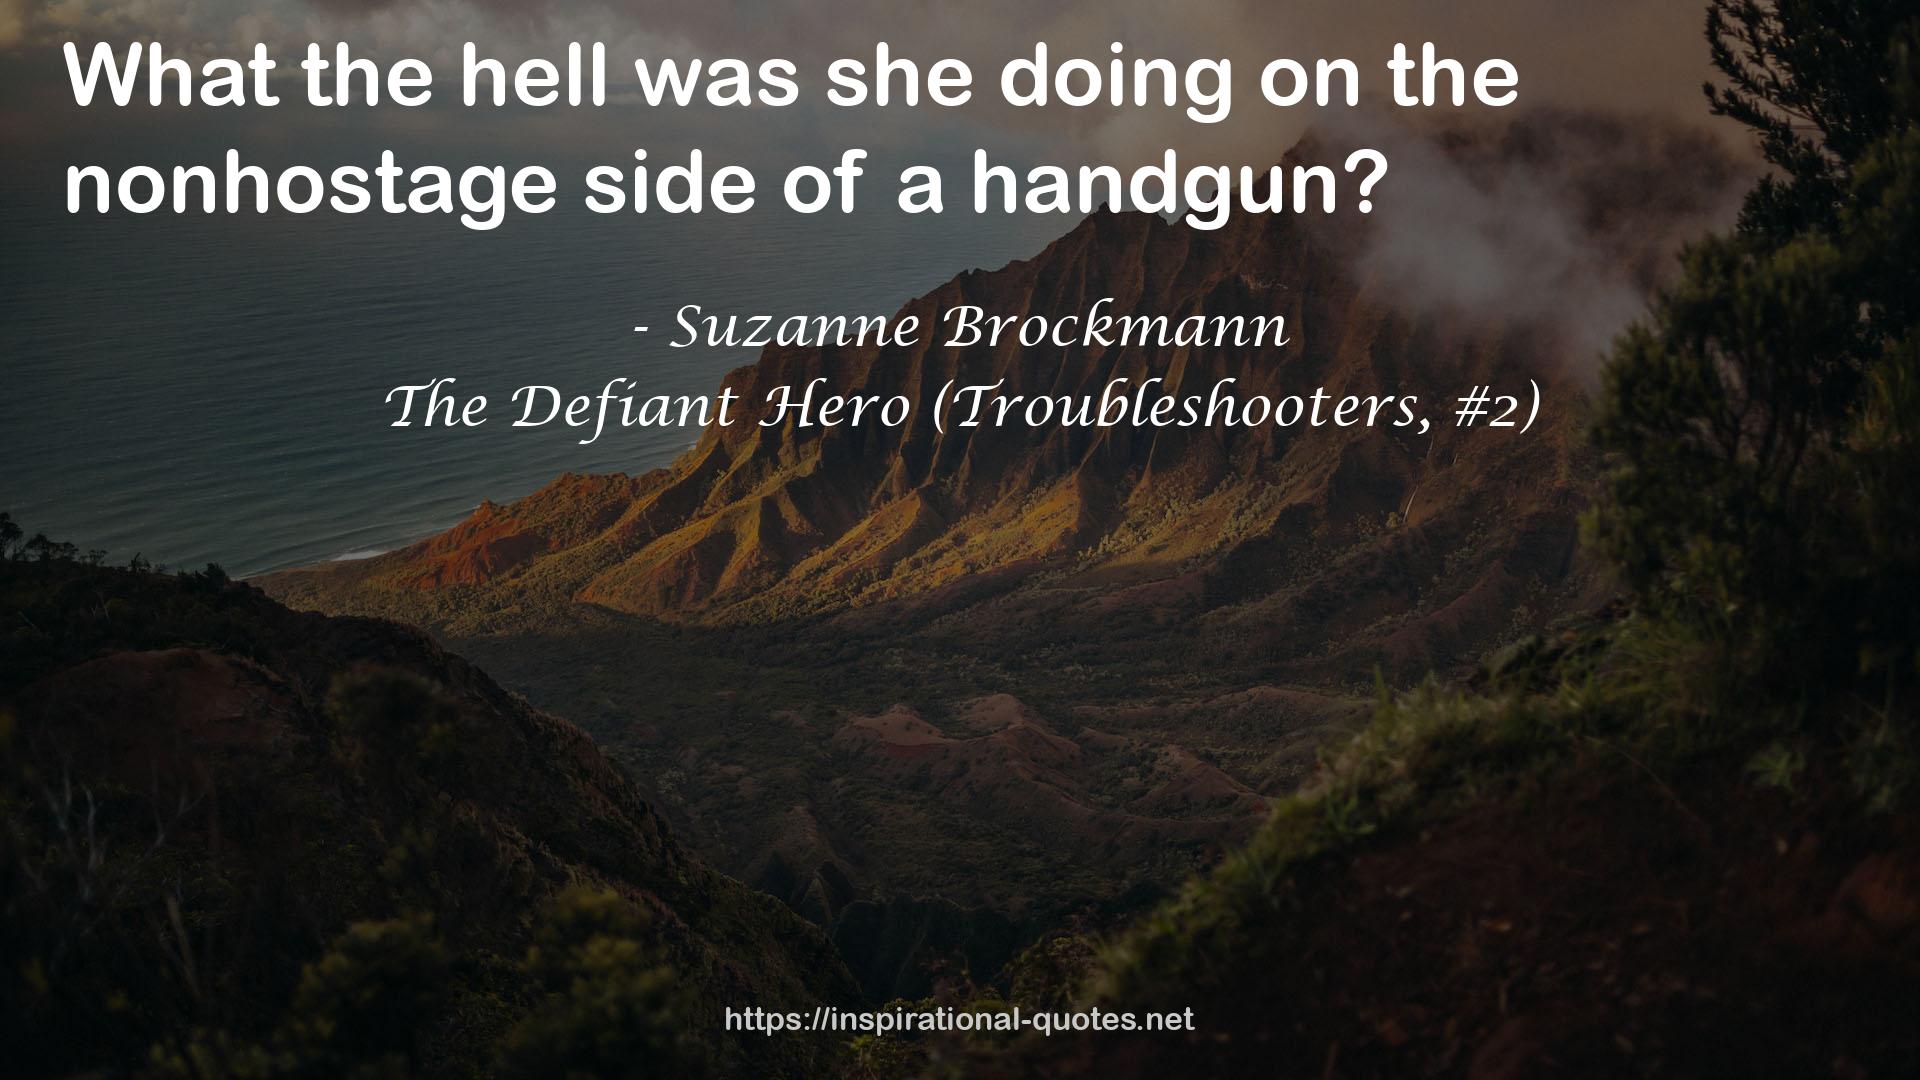 The Defiant Hero (Troubleshooters, #2) QUOTES